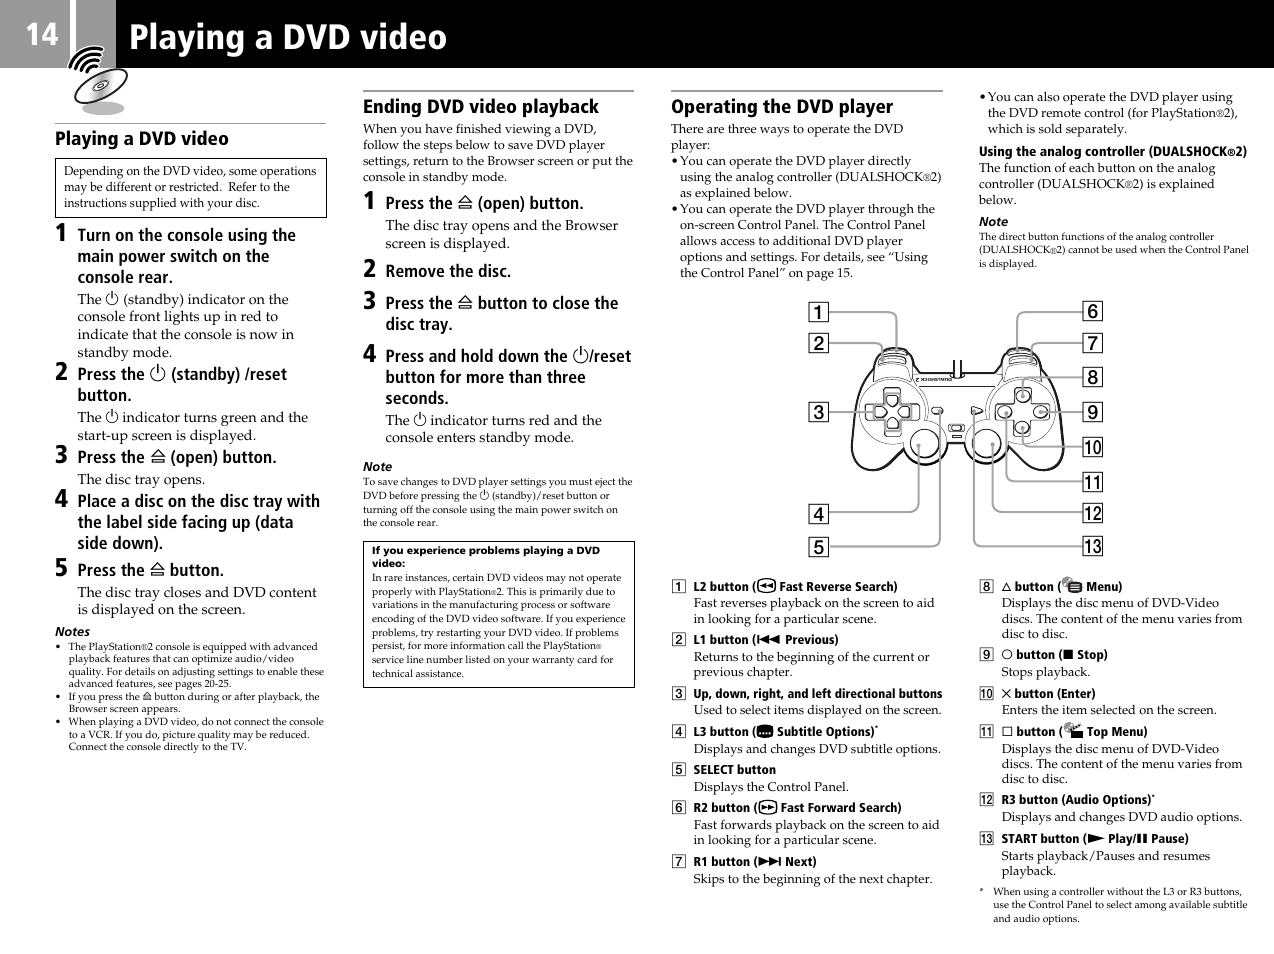 Playing a dvd video, Ending dvd video playback, Operating the dvd player | Sony SCPH-50006 User Manual | Page 14 / 56